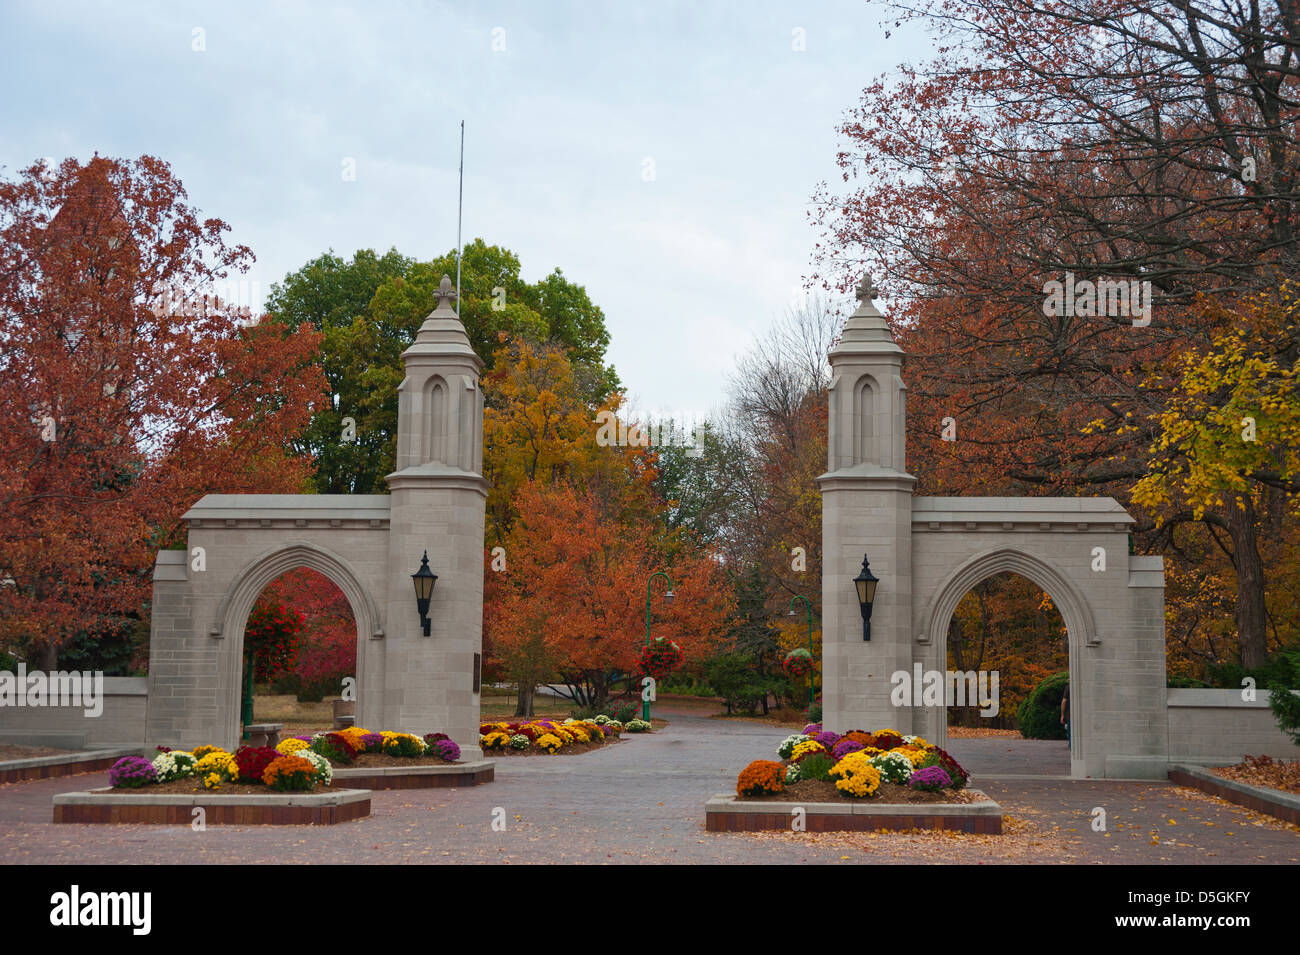 https://c8.alamy.com/comp/D5GKFY/the-entrance-to-the-campus-at-indiana-university-in-bloomington-indiana-D5GKFY.jpg